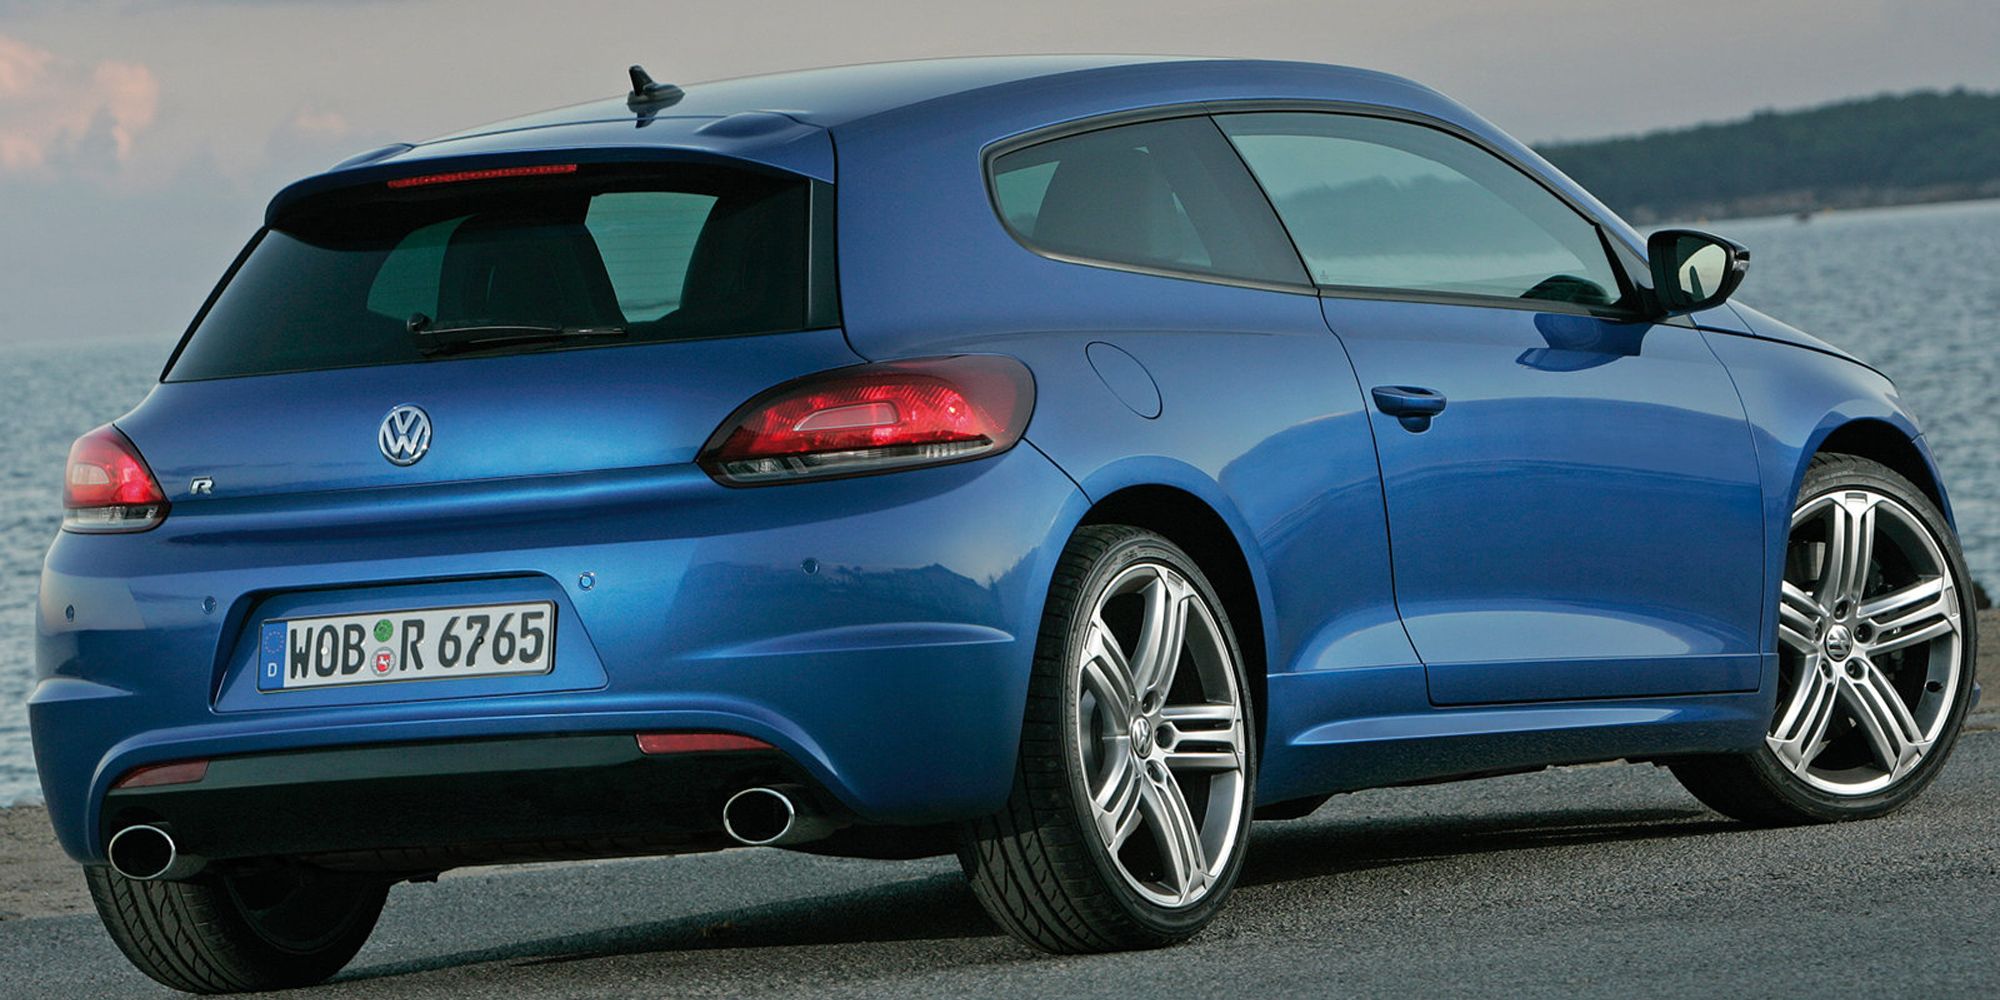 The rear of the VW Scirocco R